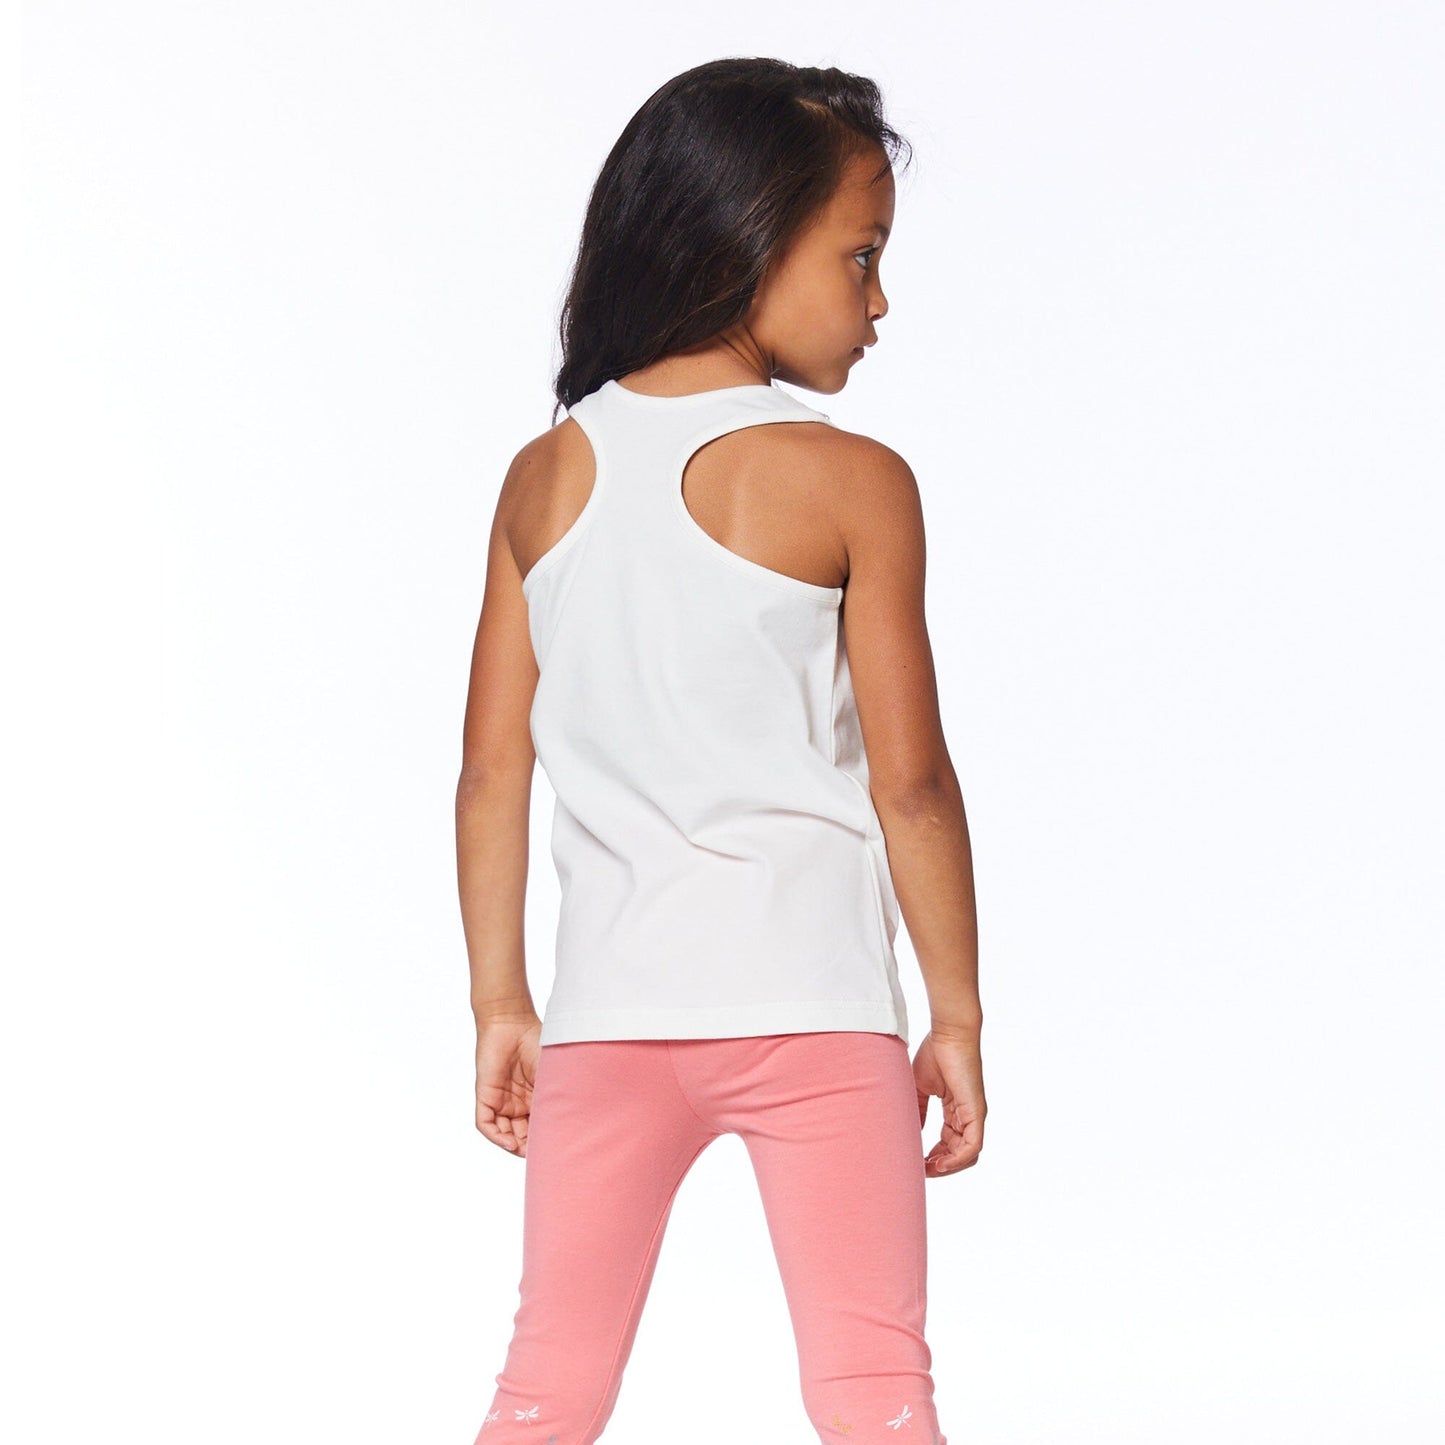 Organic Cotton Graphic Tank With Lace Off White - E30H72_101